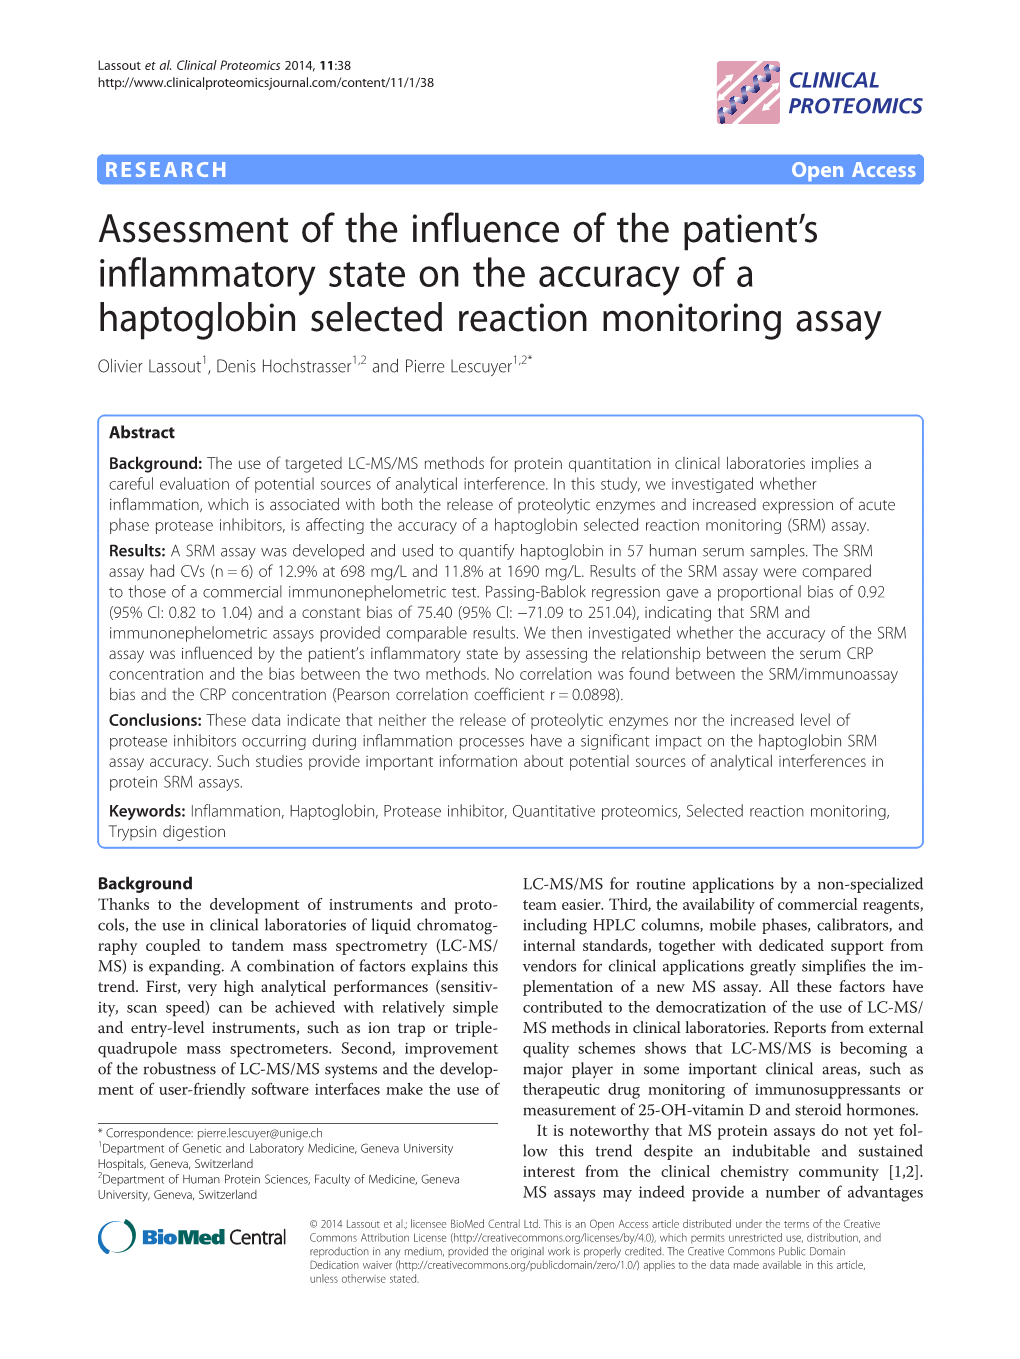 Assessment of the Influence of the Patient's Inflammatory State on The